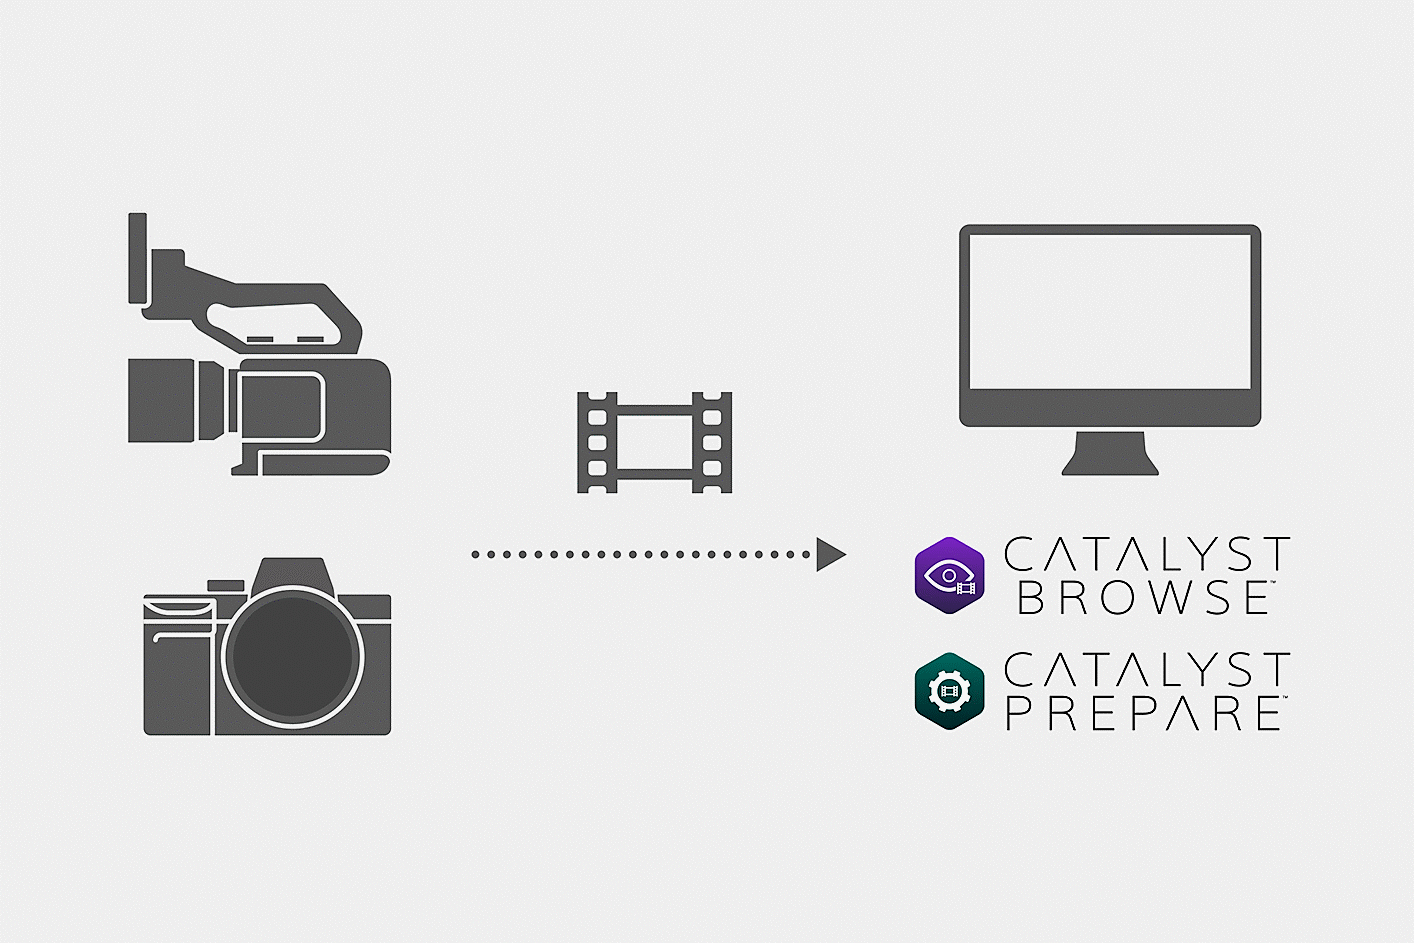 An illustration showing how movie files shot with the camera are loaded into Catalyst Browser or Catalyst Prepare